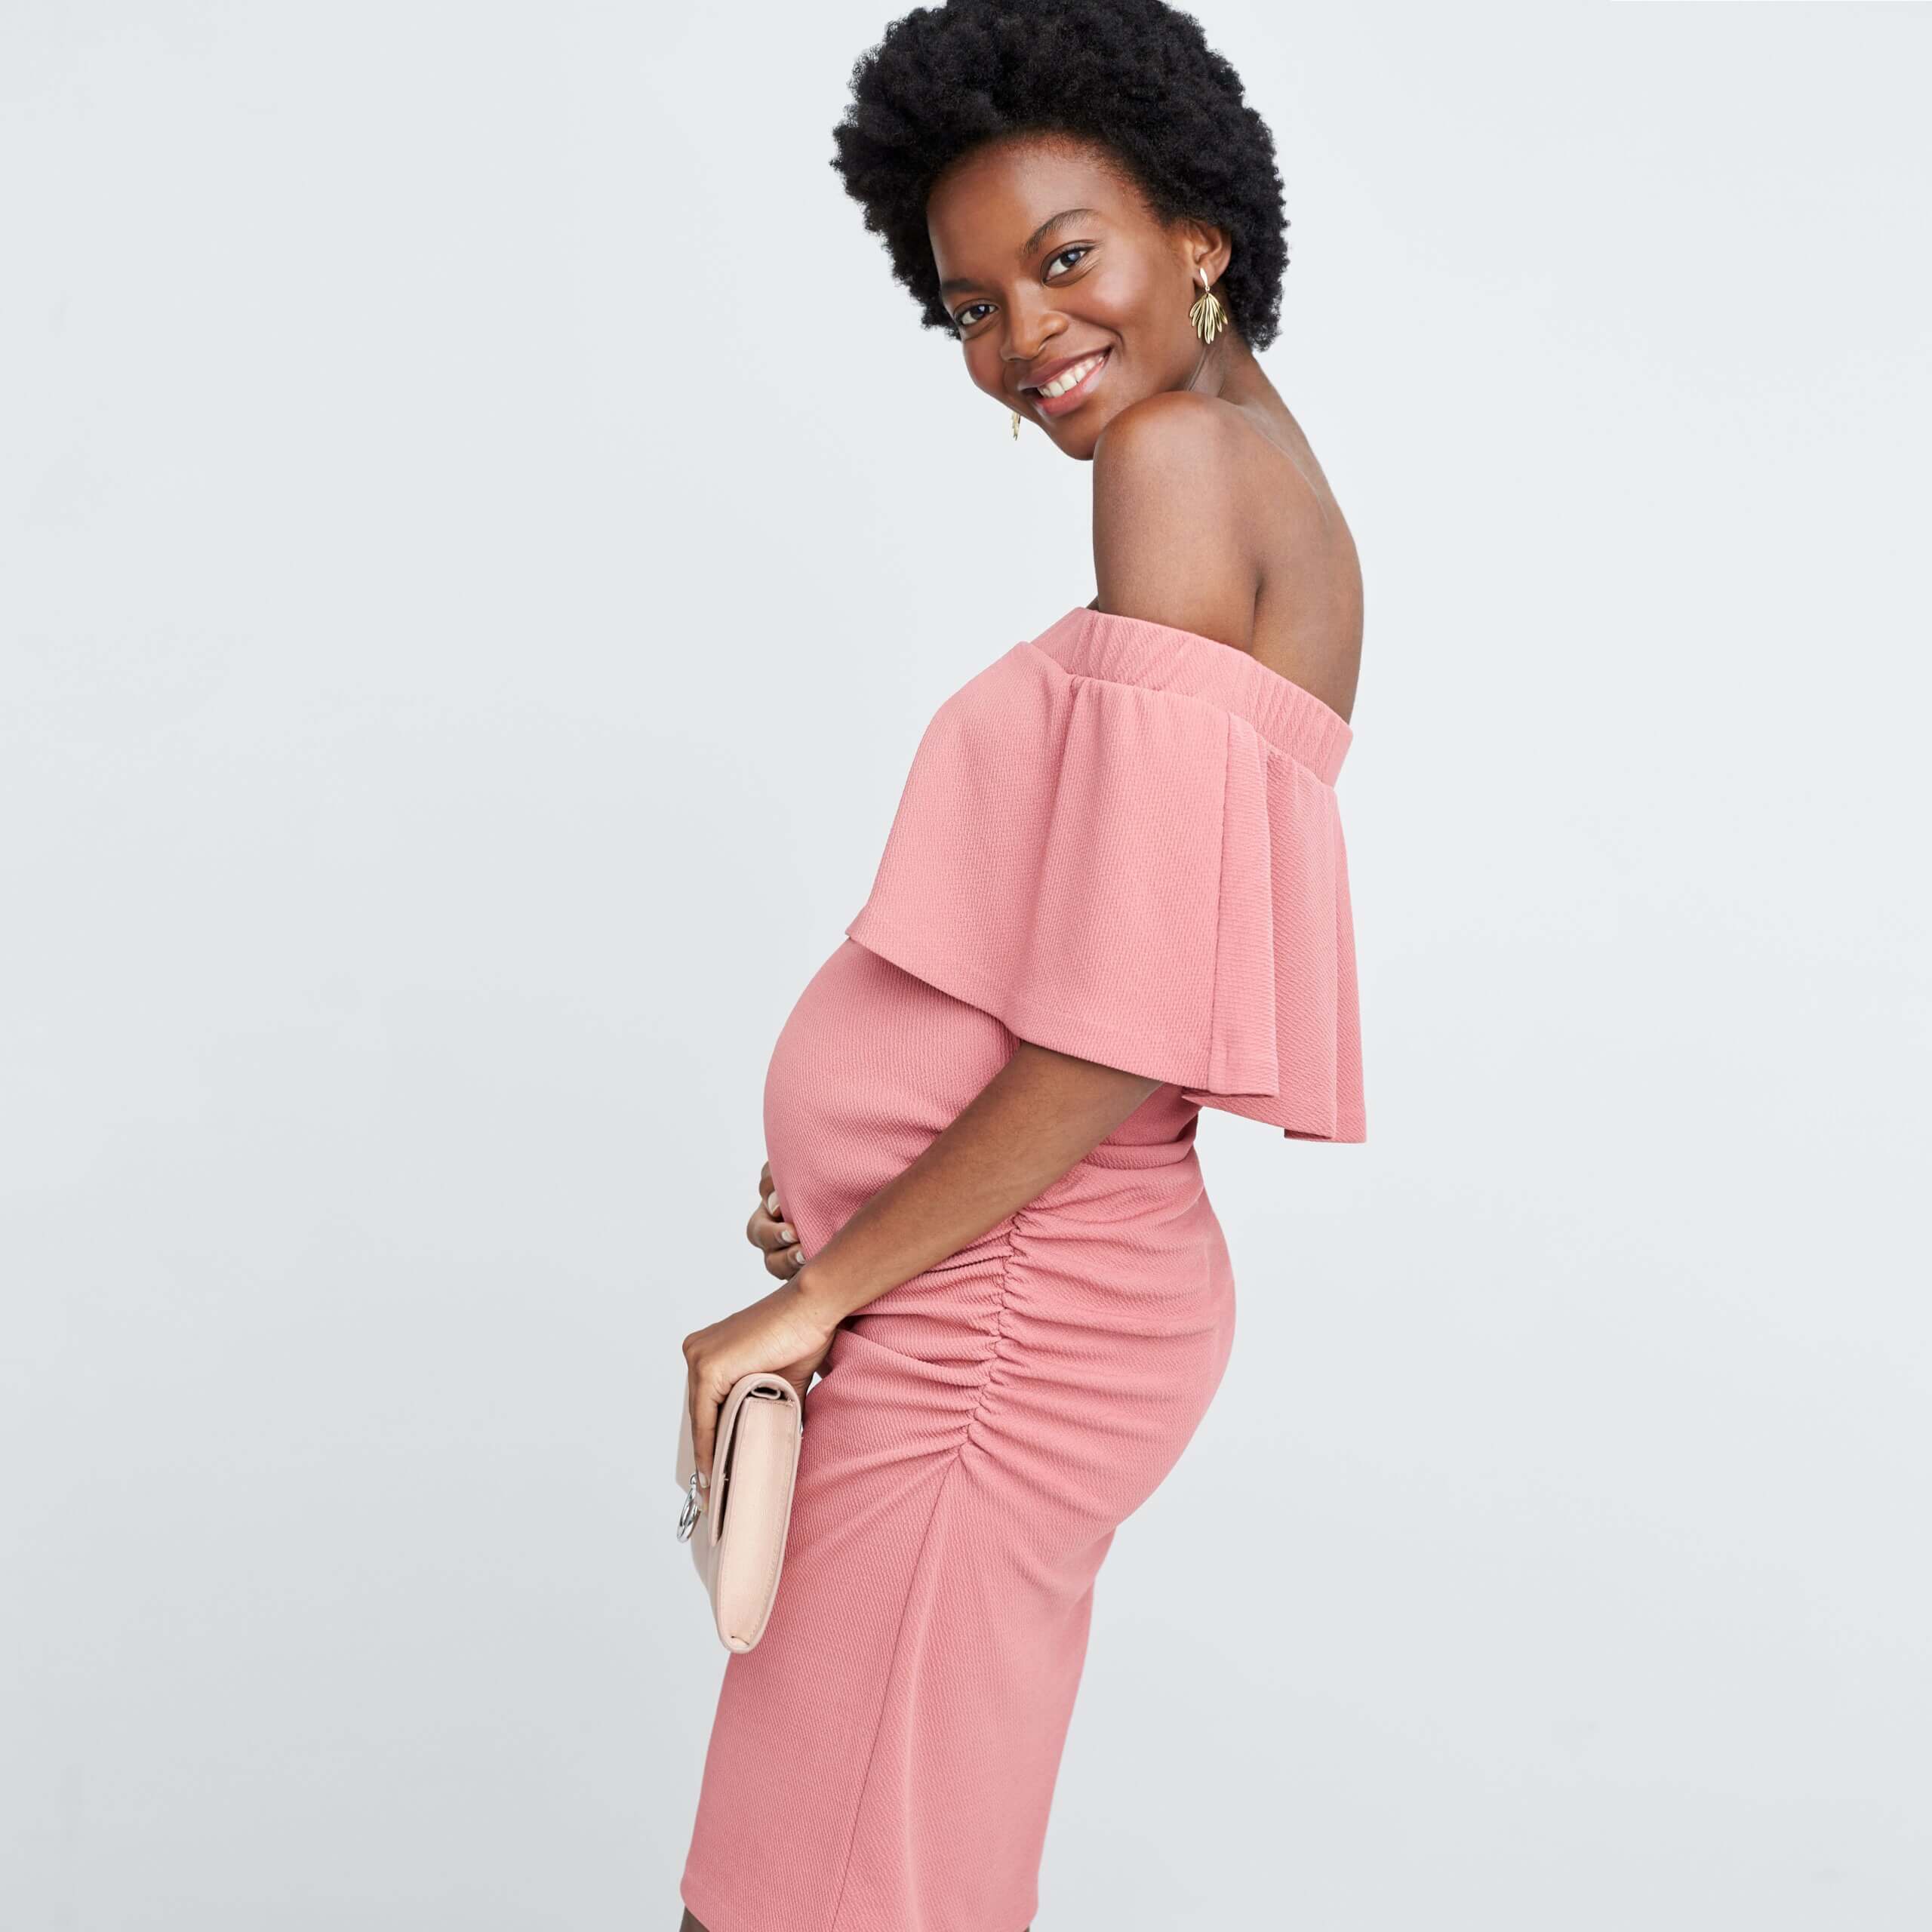 How To Pick The Best Maternity Dress & Feel Confident When Pregnant